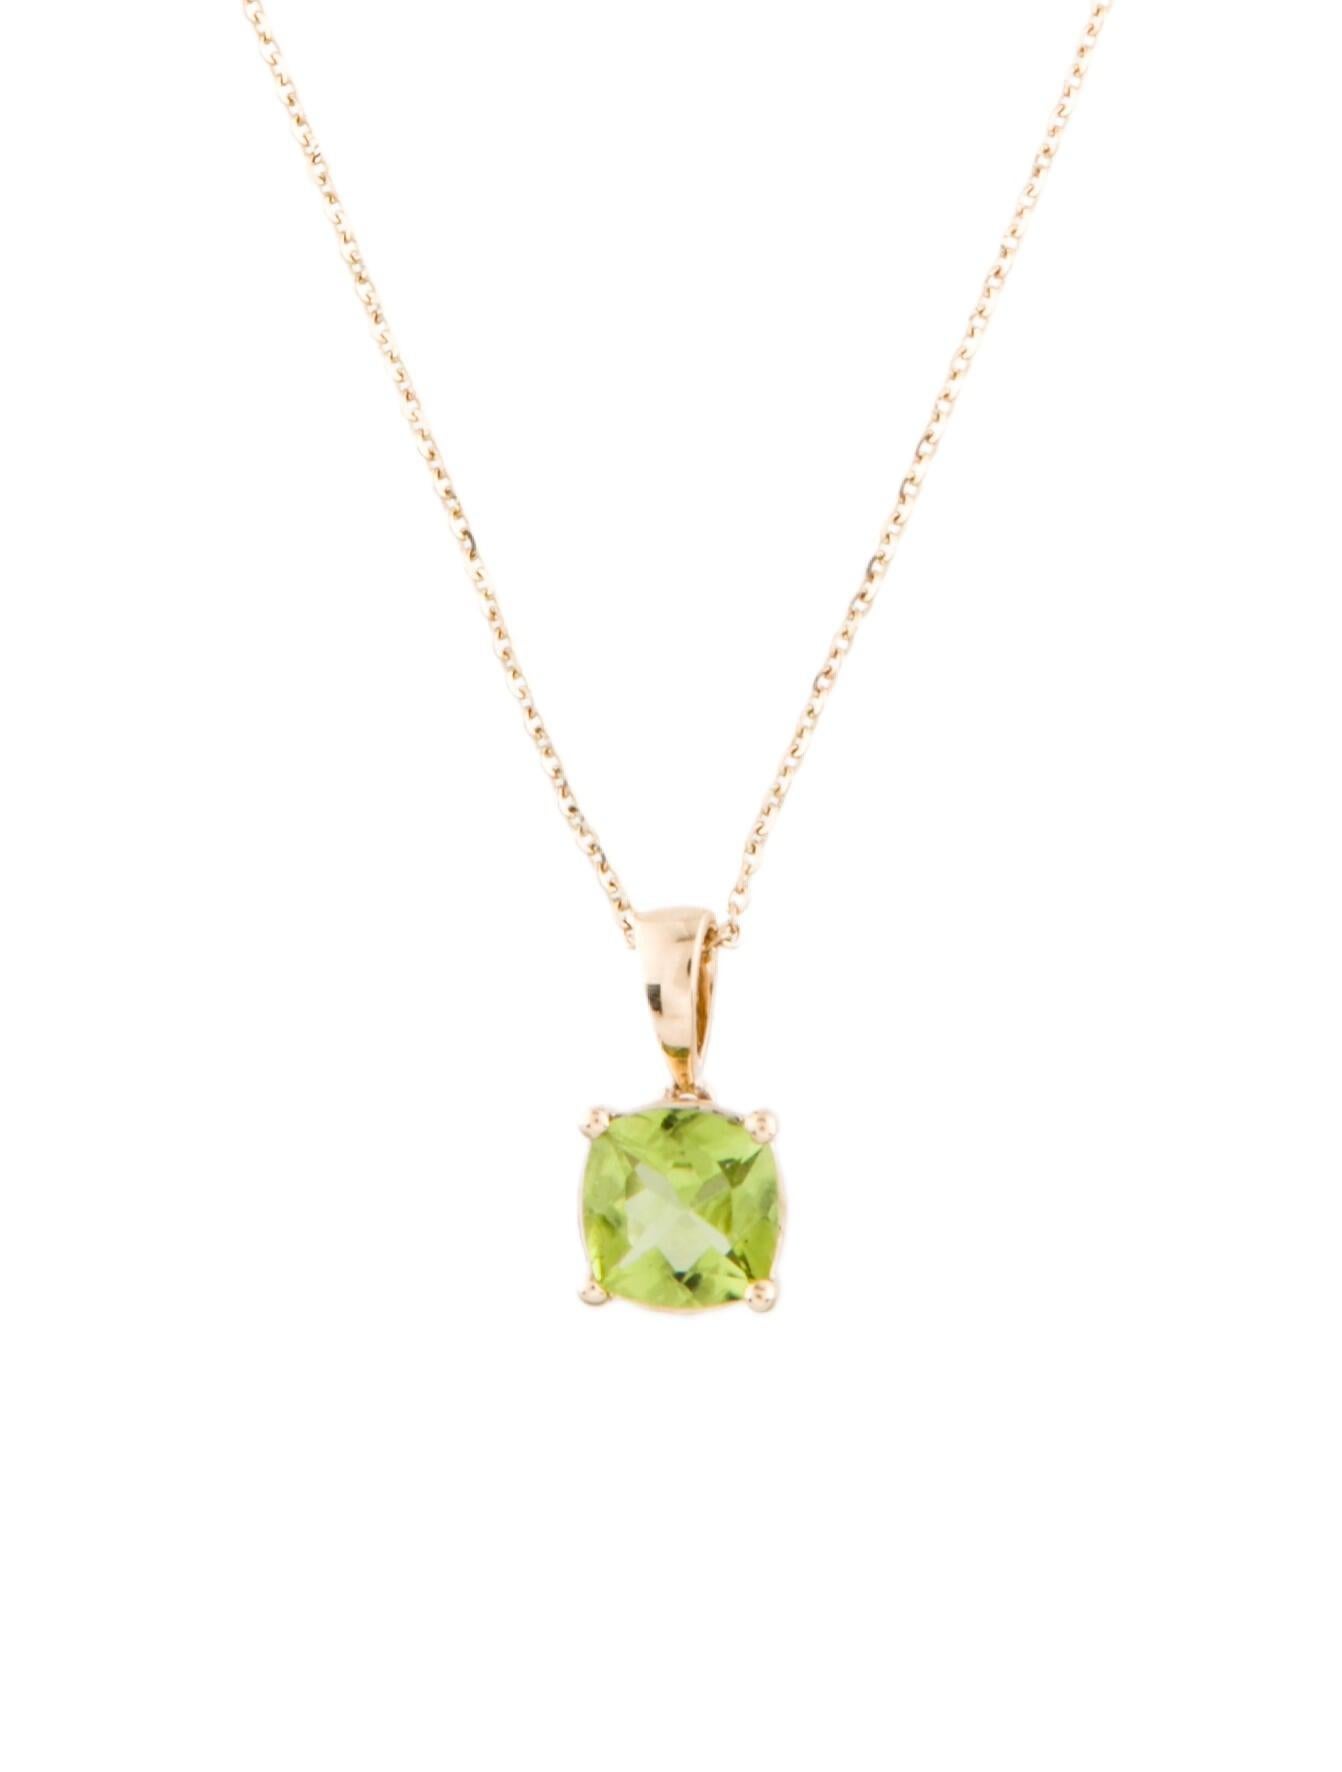 Luxury 14K Peridot Pendant Necklace  1.23ct Gemstone  Elegant Jewelry In New Condition For Sale In Holtsville, NY